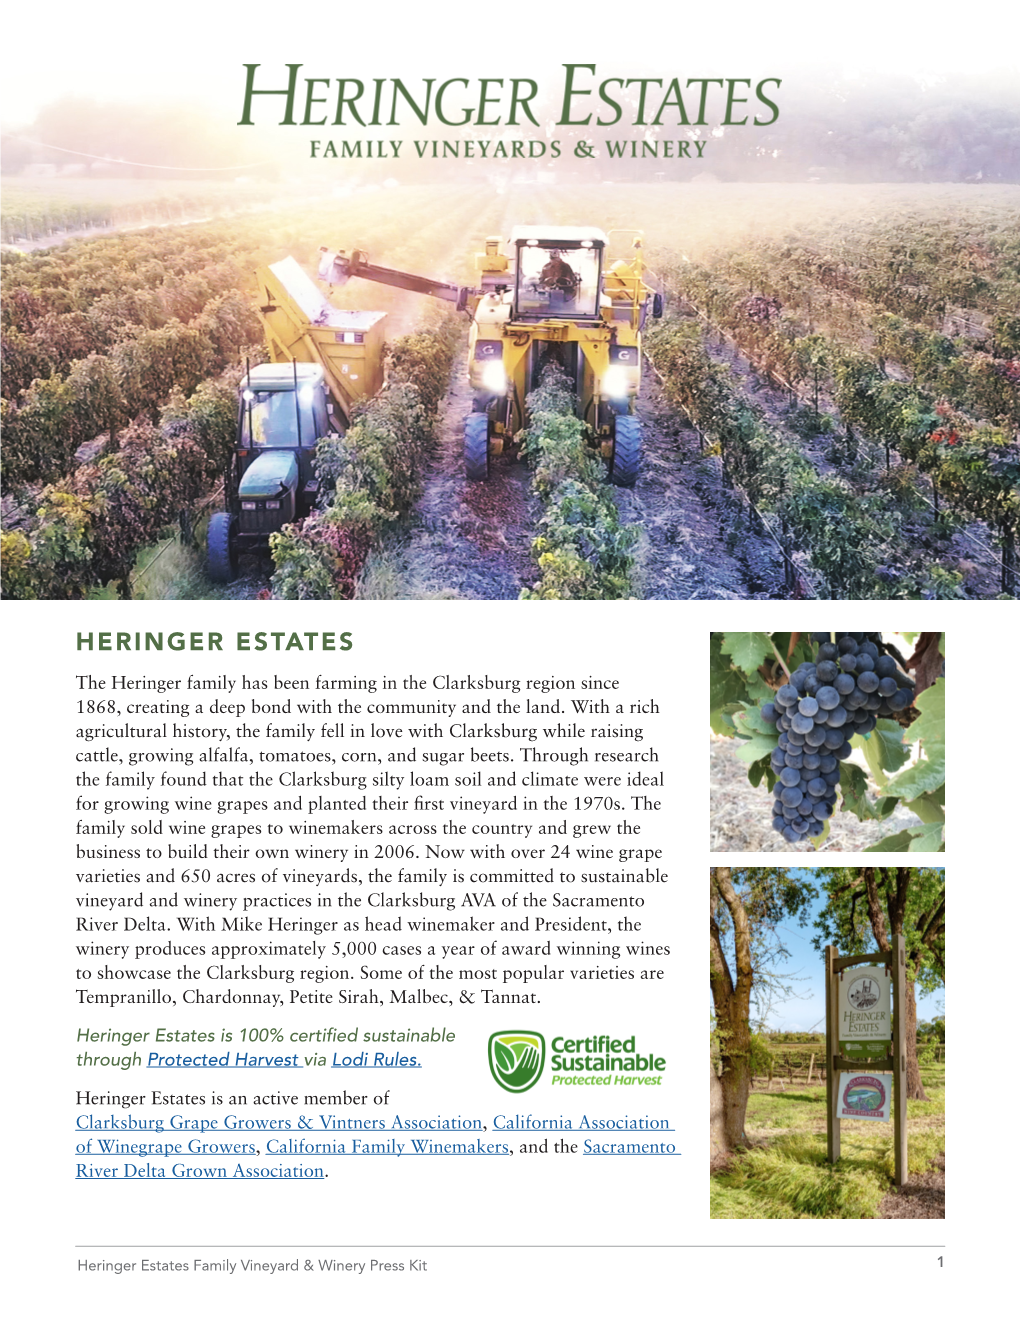 HERINGER ESTATES the Heringer Family Has Been Farming in the Clarksburg Region Since 1868, Creating a Deep Bond with the Community and the Land